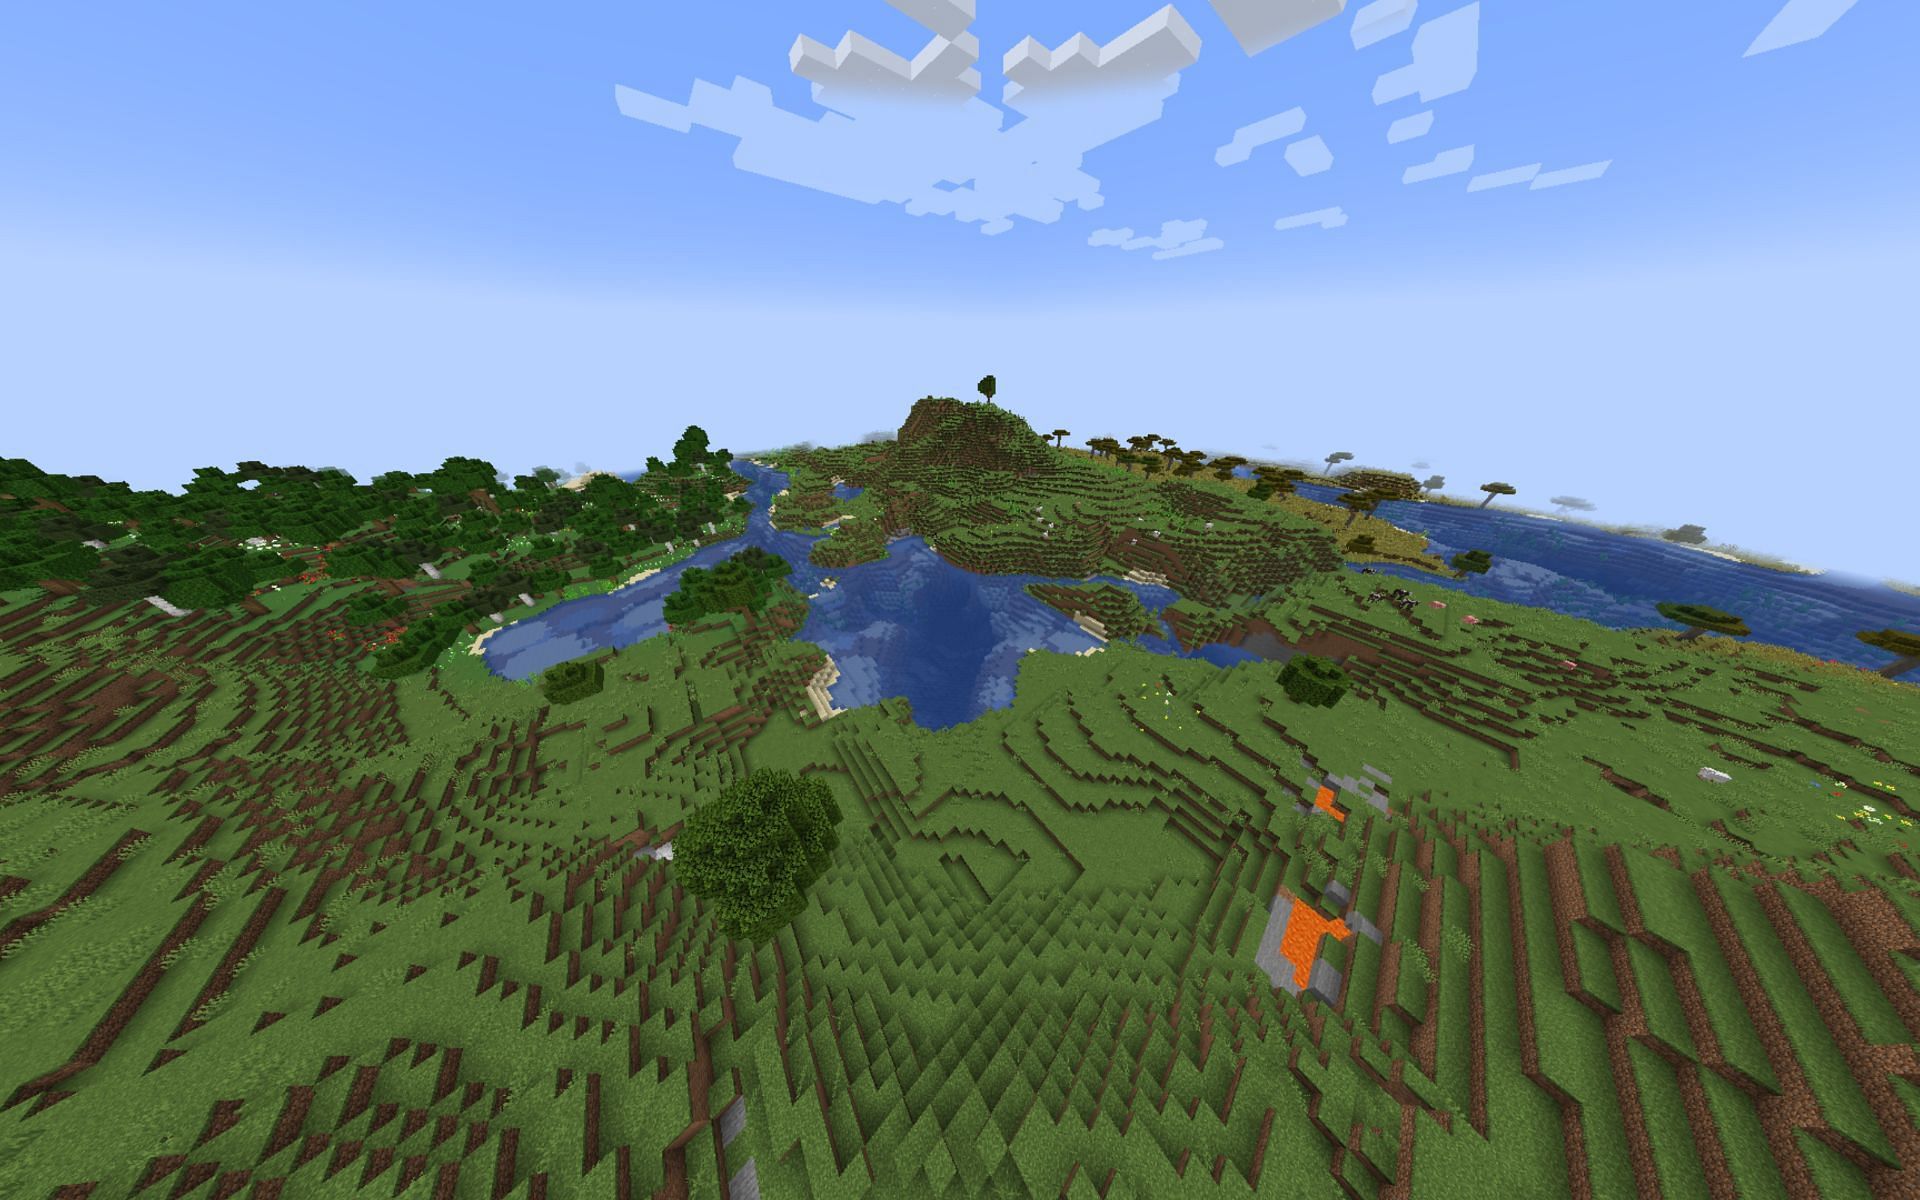 World spawn for &quot;Easy Diamonds&quot; seed, overlooking an underwater ravine (Image via Mojang)